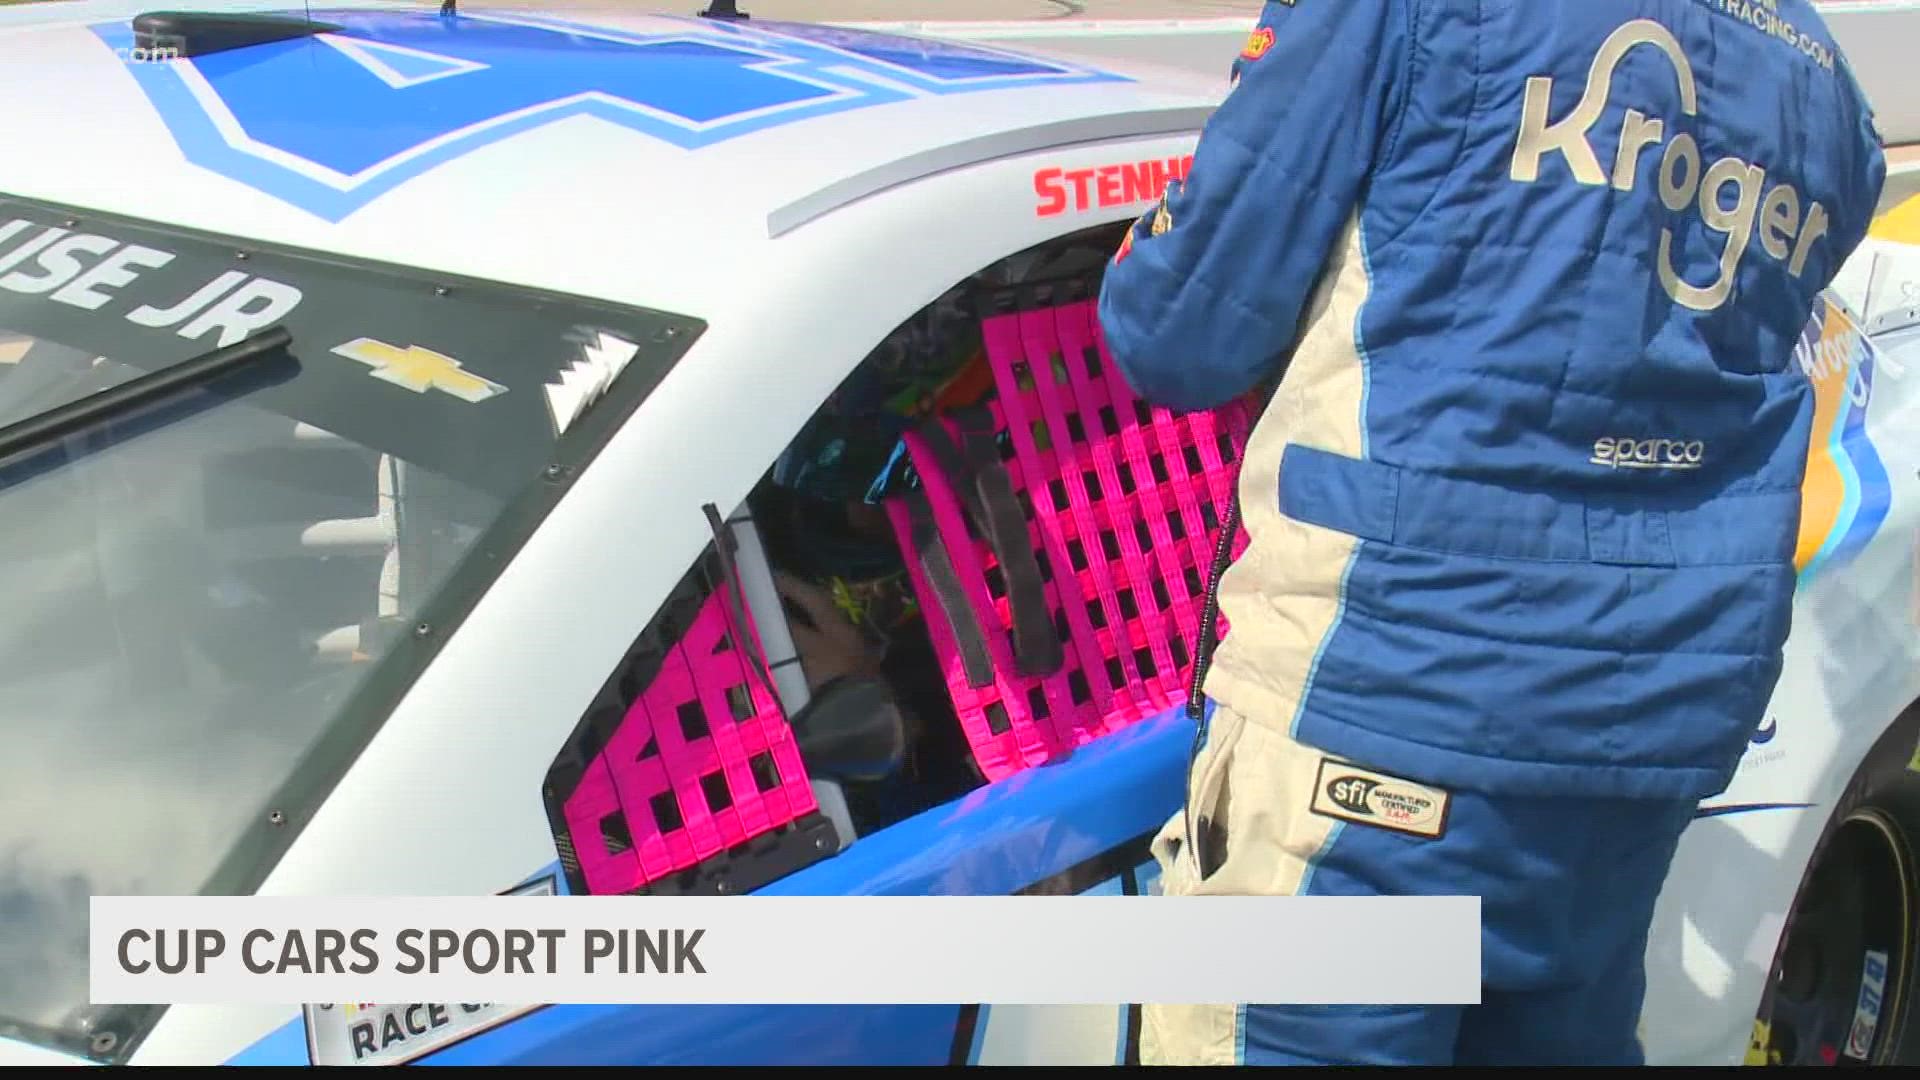 A fan of NASCAR driver Kurt Busch came up with the idea of pink window nets and Busch galvanized the entire Cup garage in the campaign.